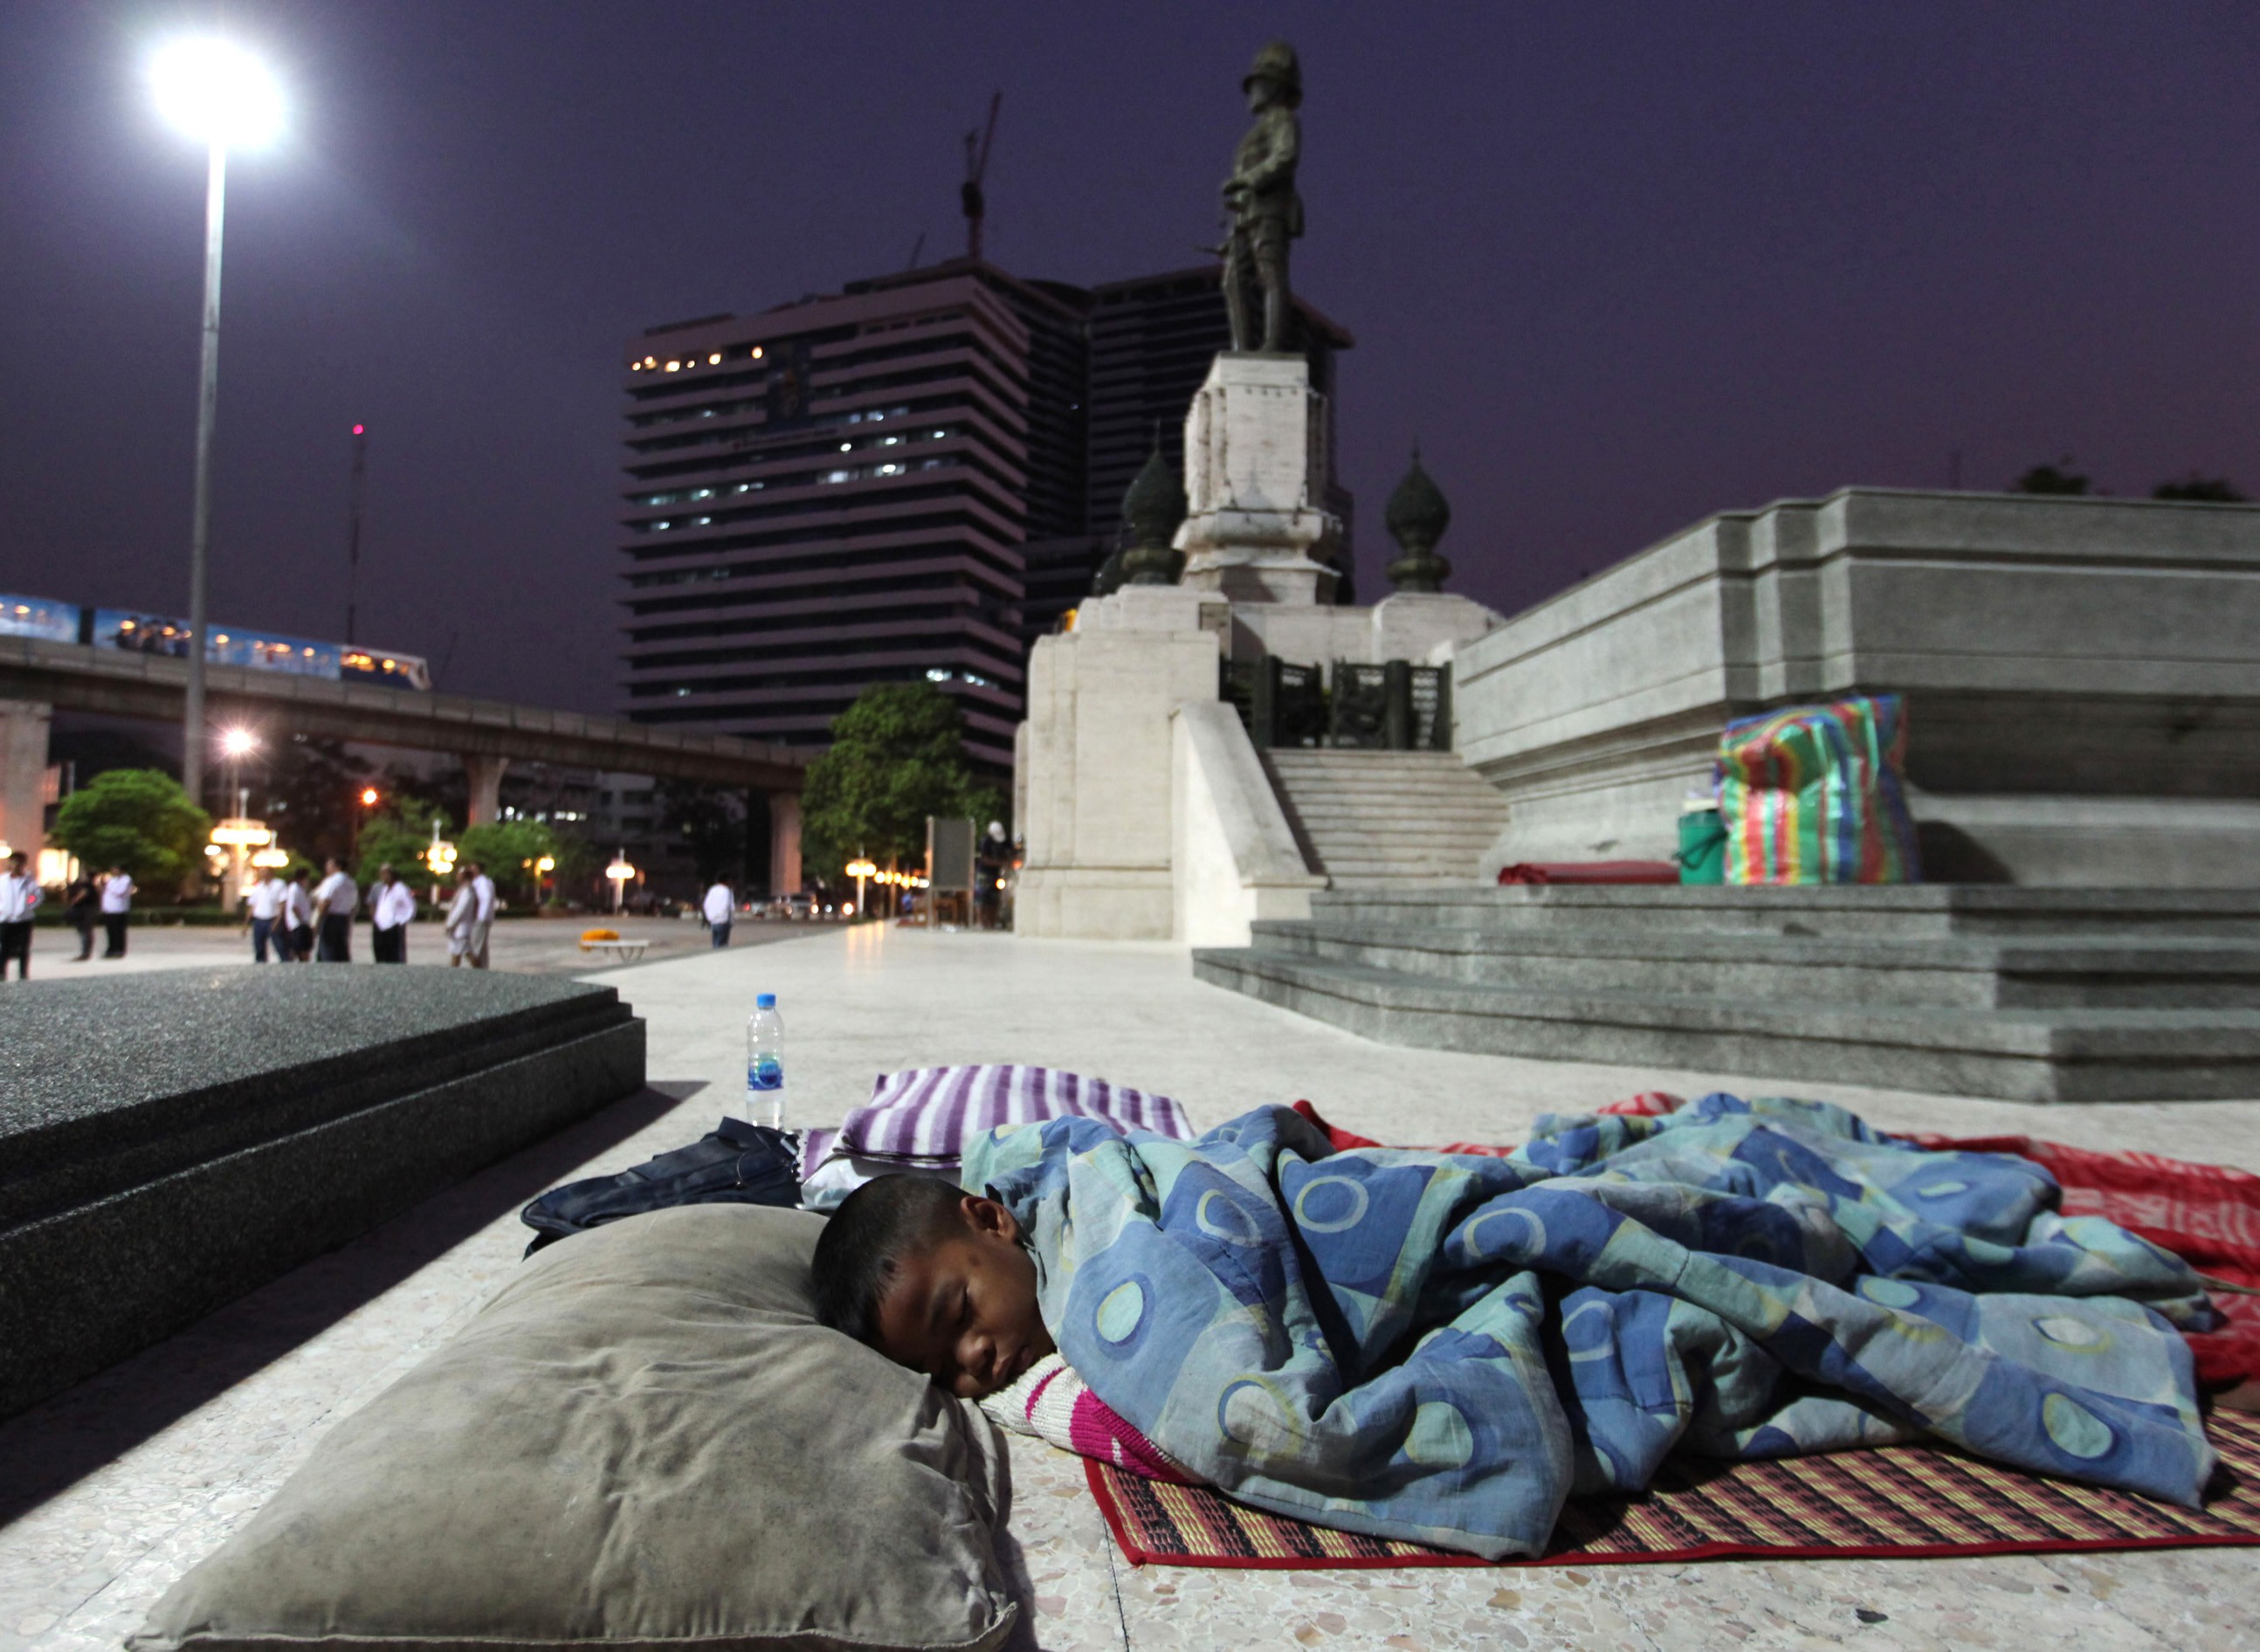 Street children in Thailand are usually from disadvantaged backgrounds. Photo: Bangkok Post